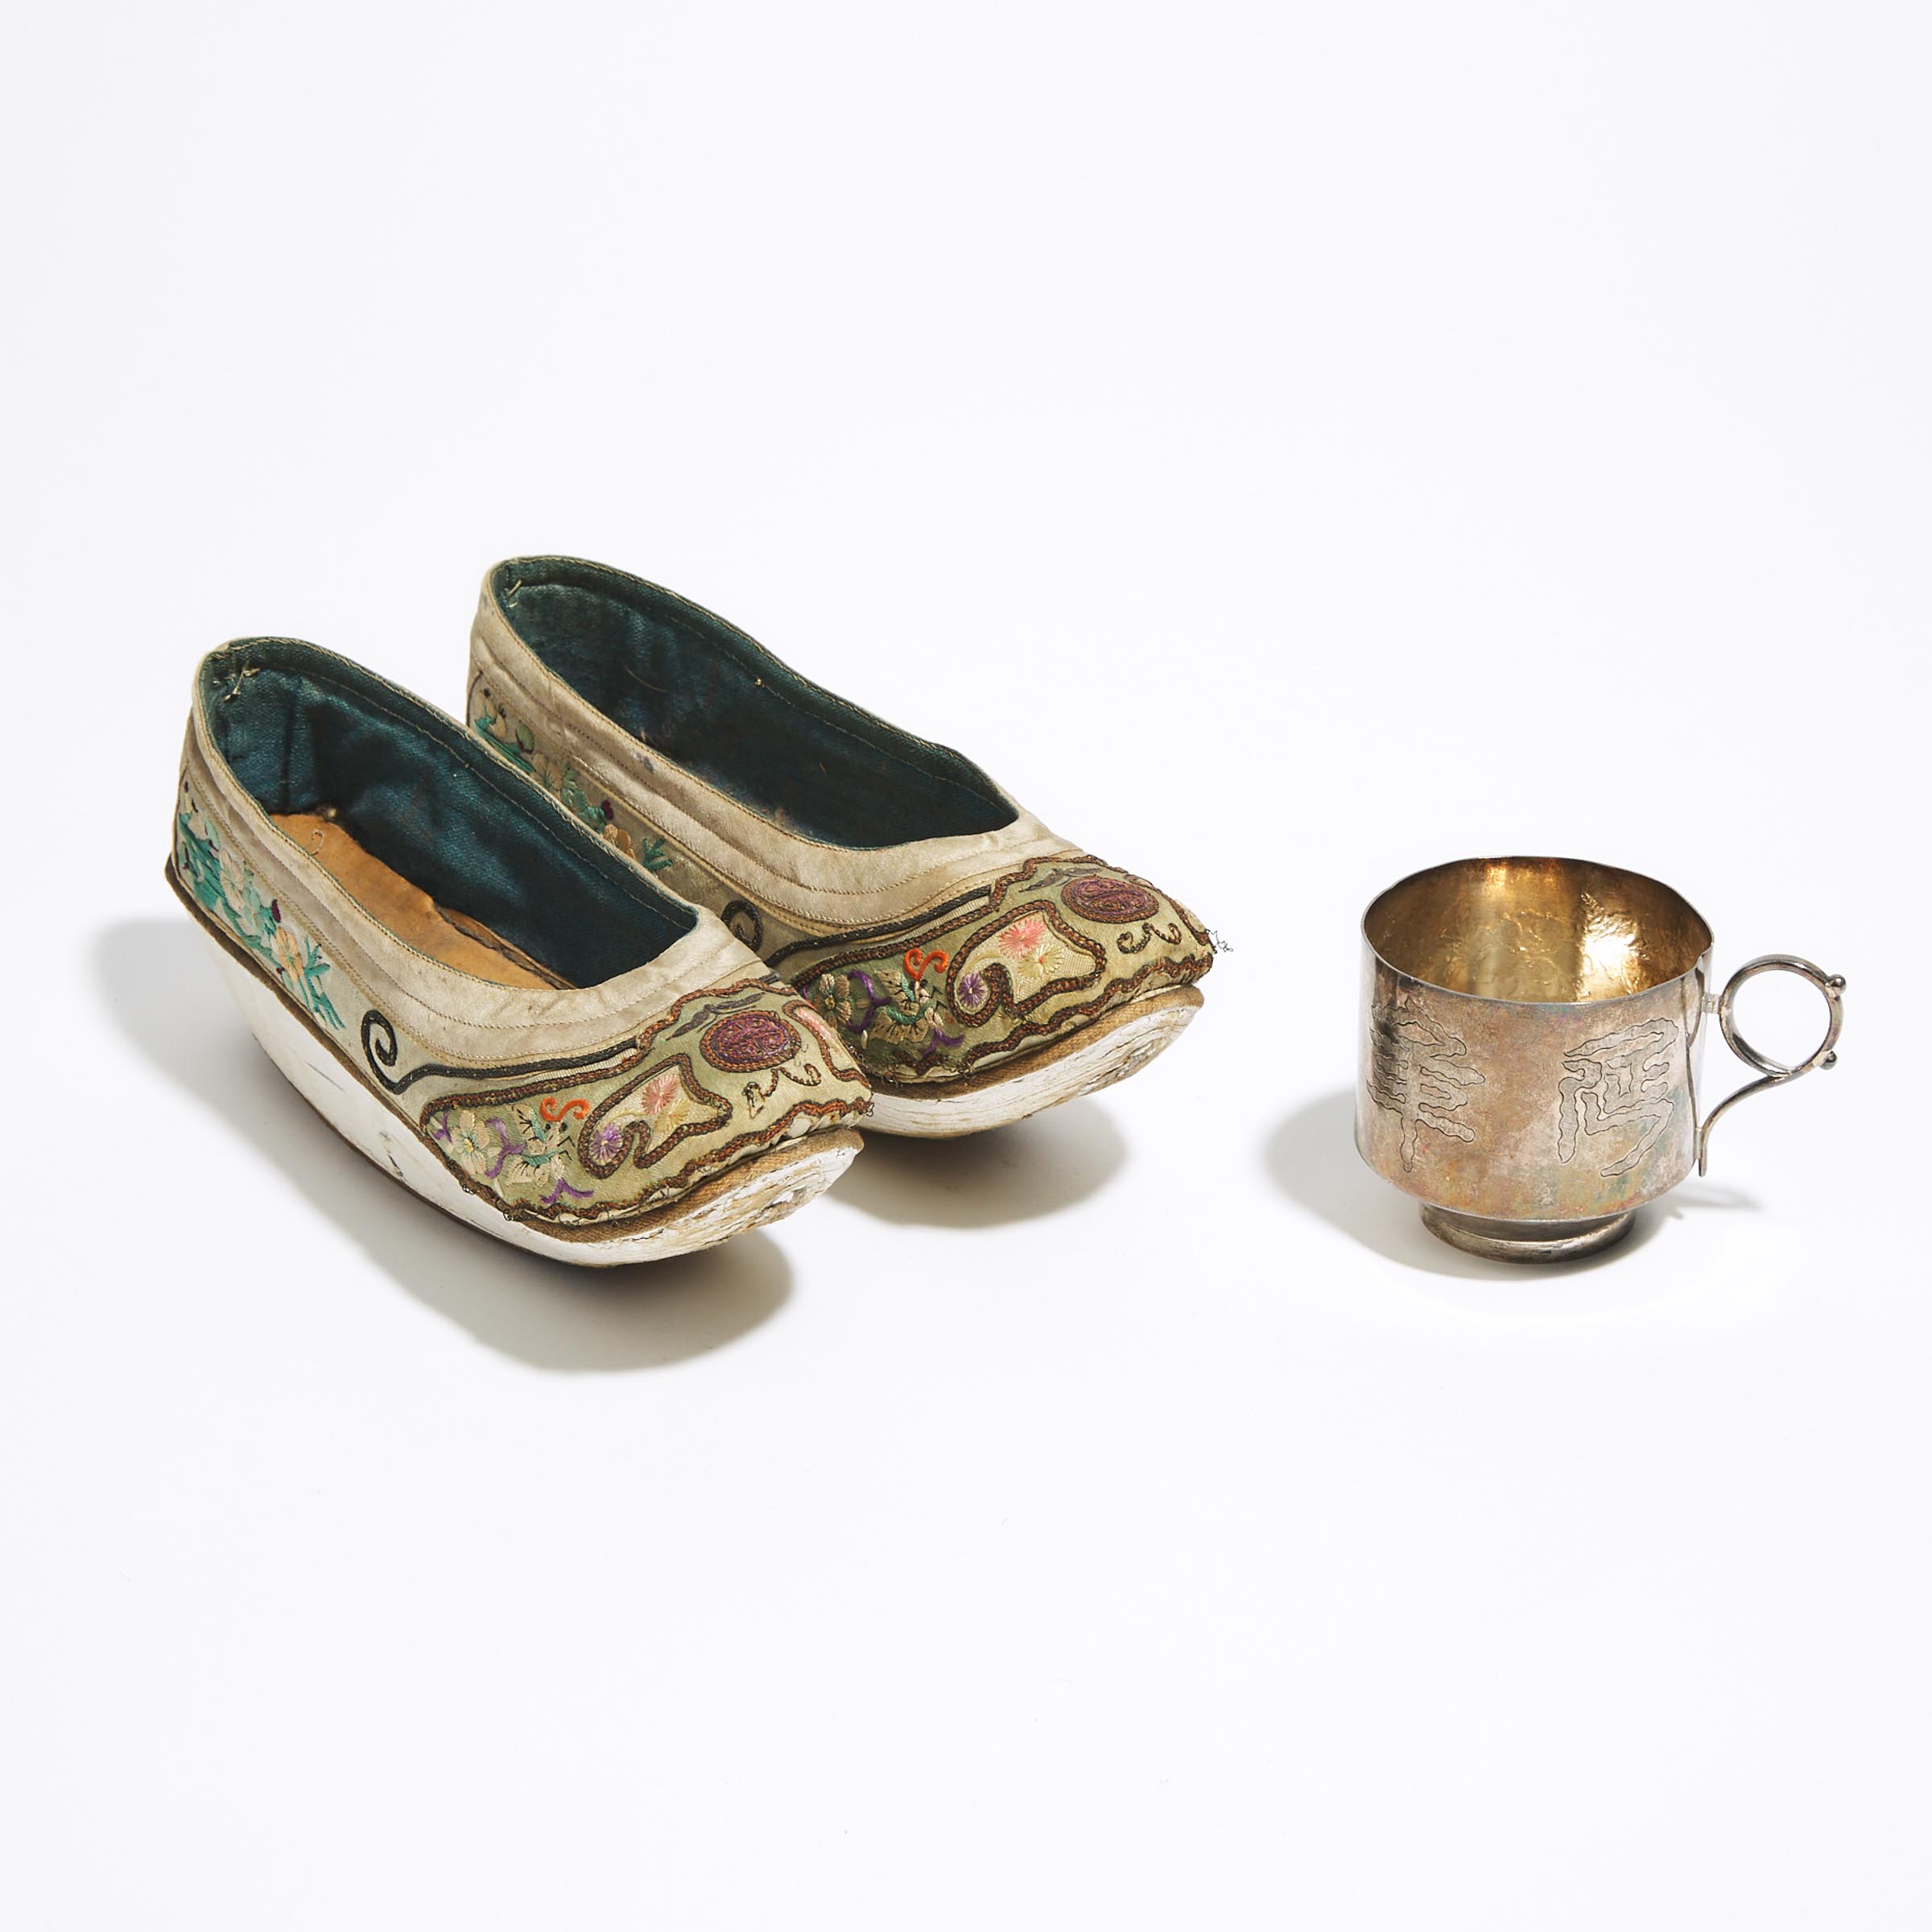 A Pair of Chinese Silk Embroidered Ladies' Shoes, together with a Silver Tea Cup, Late Qing Dynasty